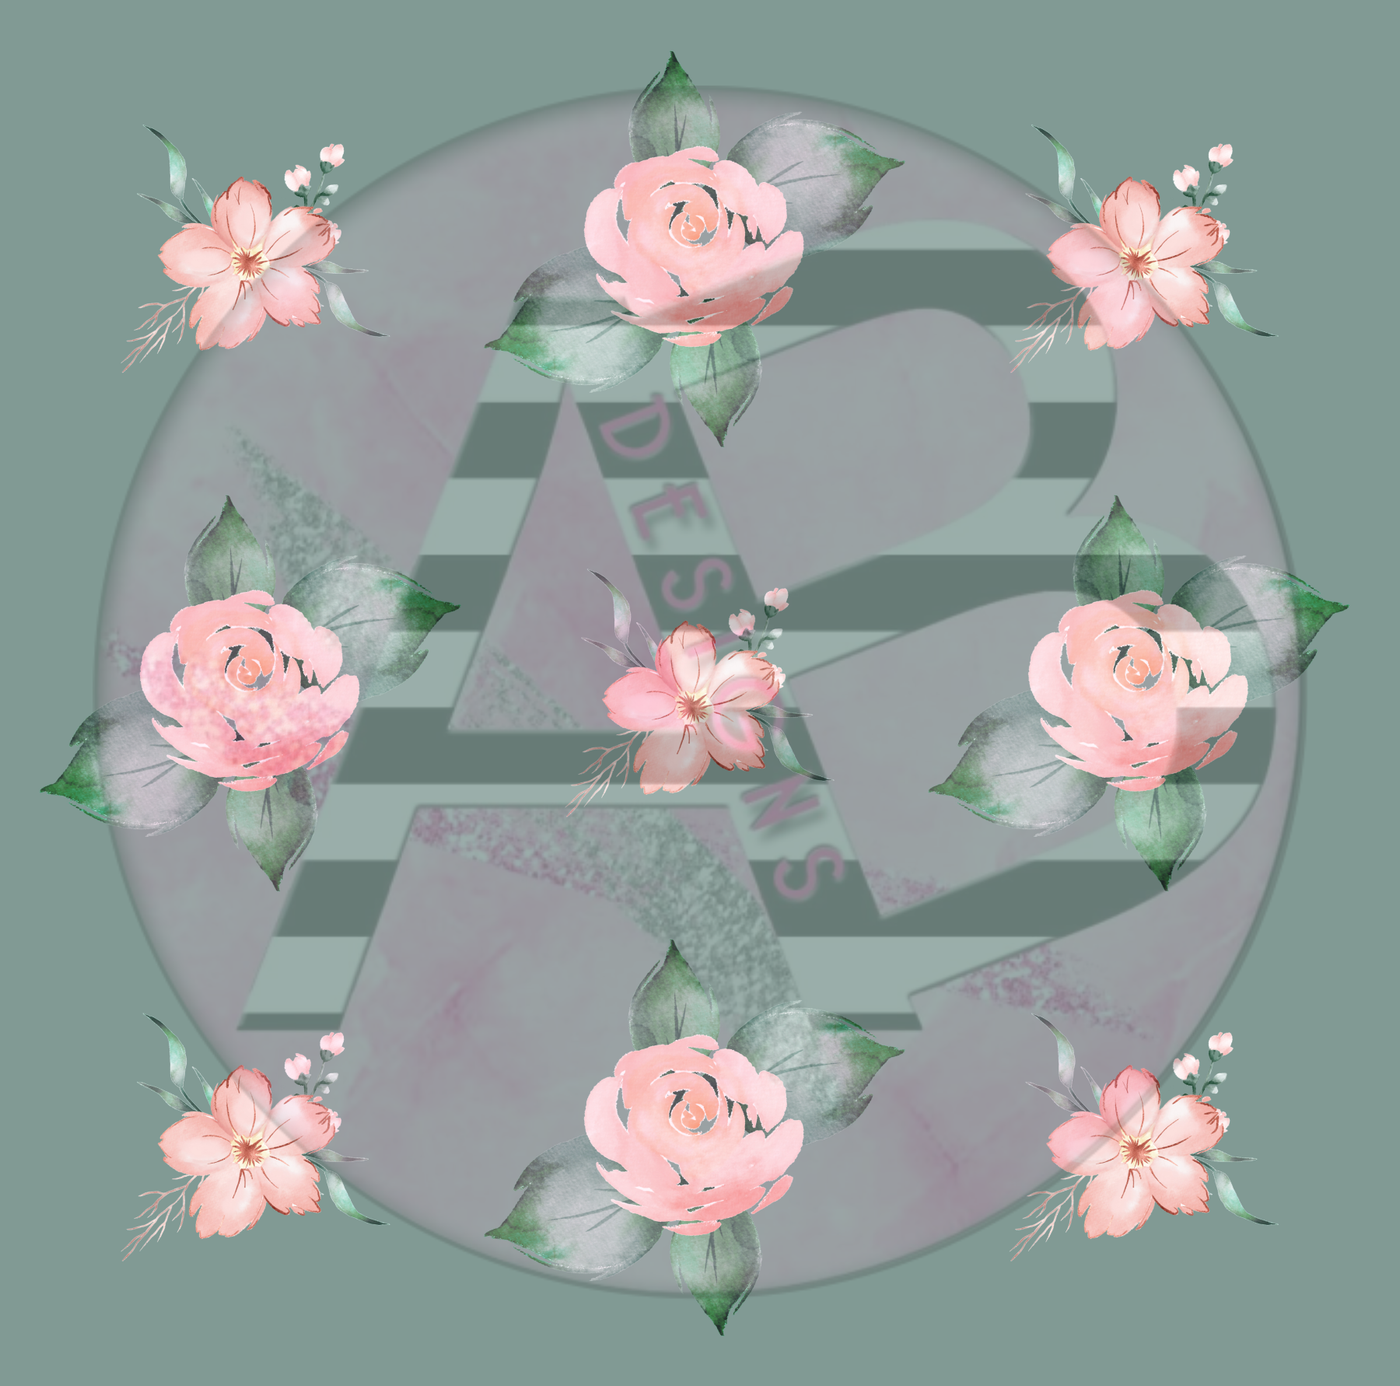 Adhesive Patterned Vinyl - Blush and Emerald Floral 08